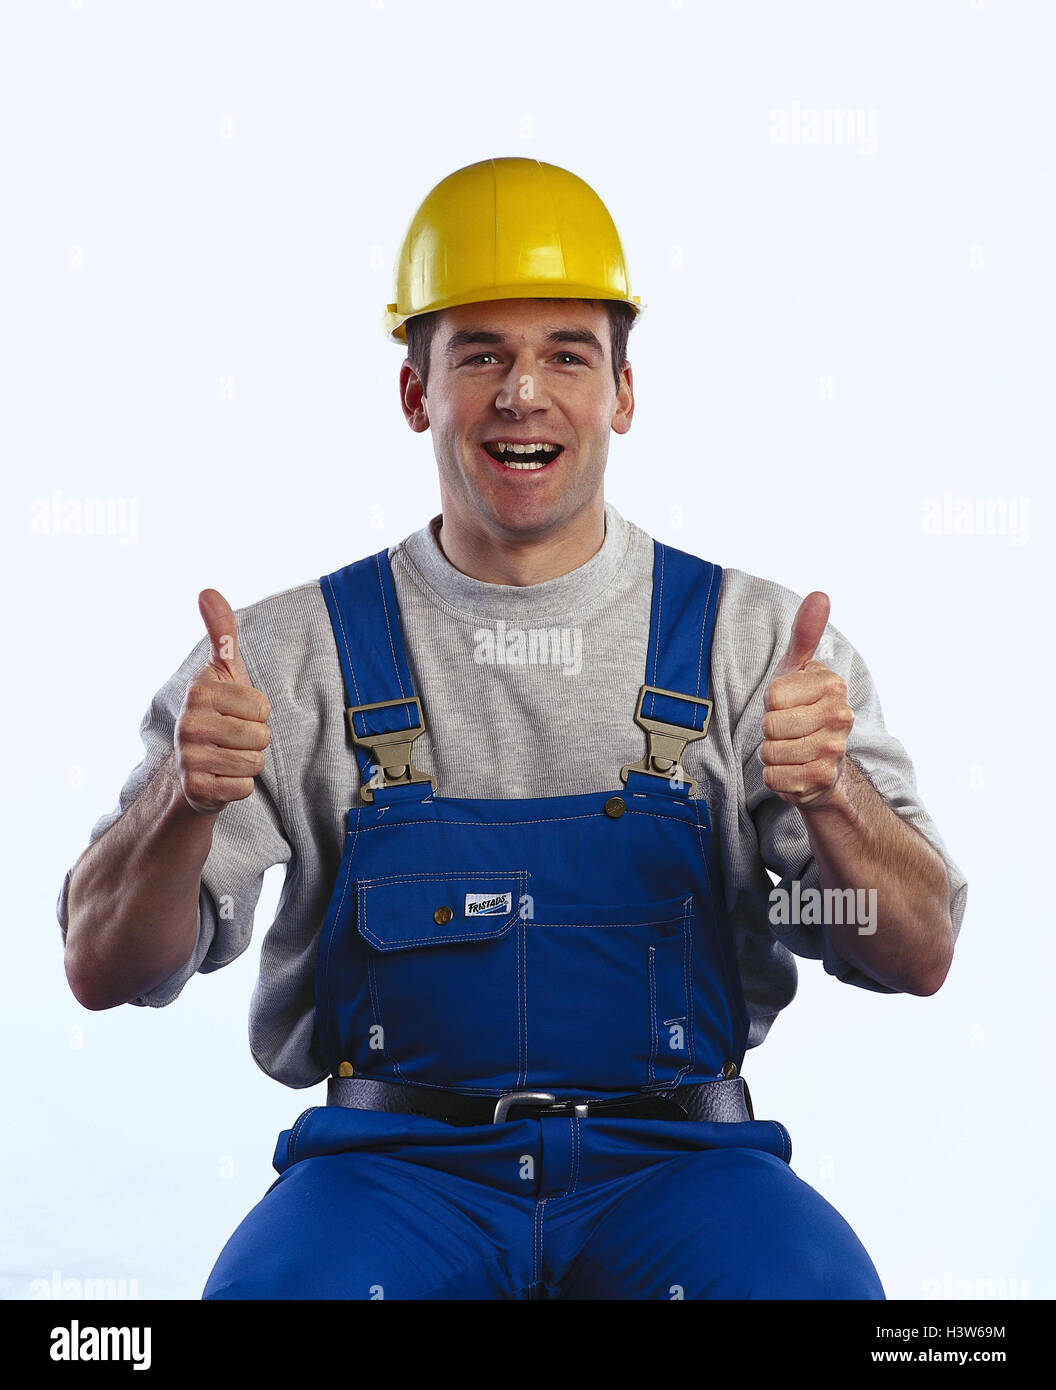 Workers, construction helmet, smile, gesture, pollex, high man, safety helmet, hard hat, working clothes, positively, joy, success, cheering, triumph, studio, cut out Stock Photo